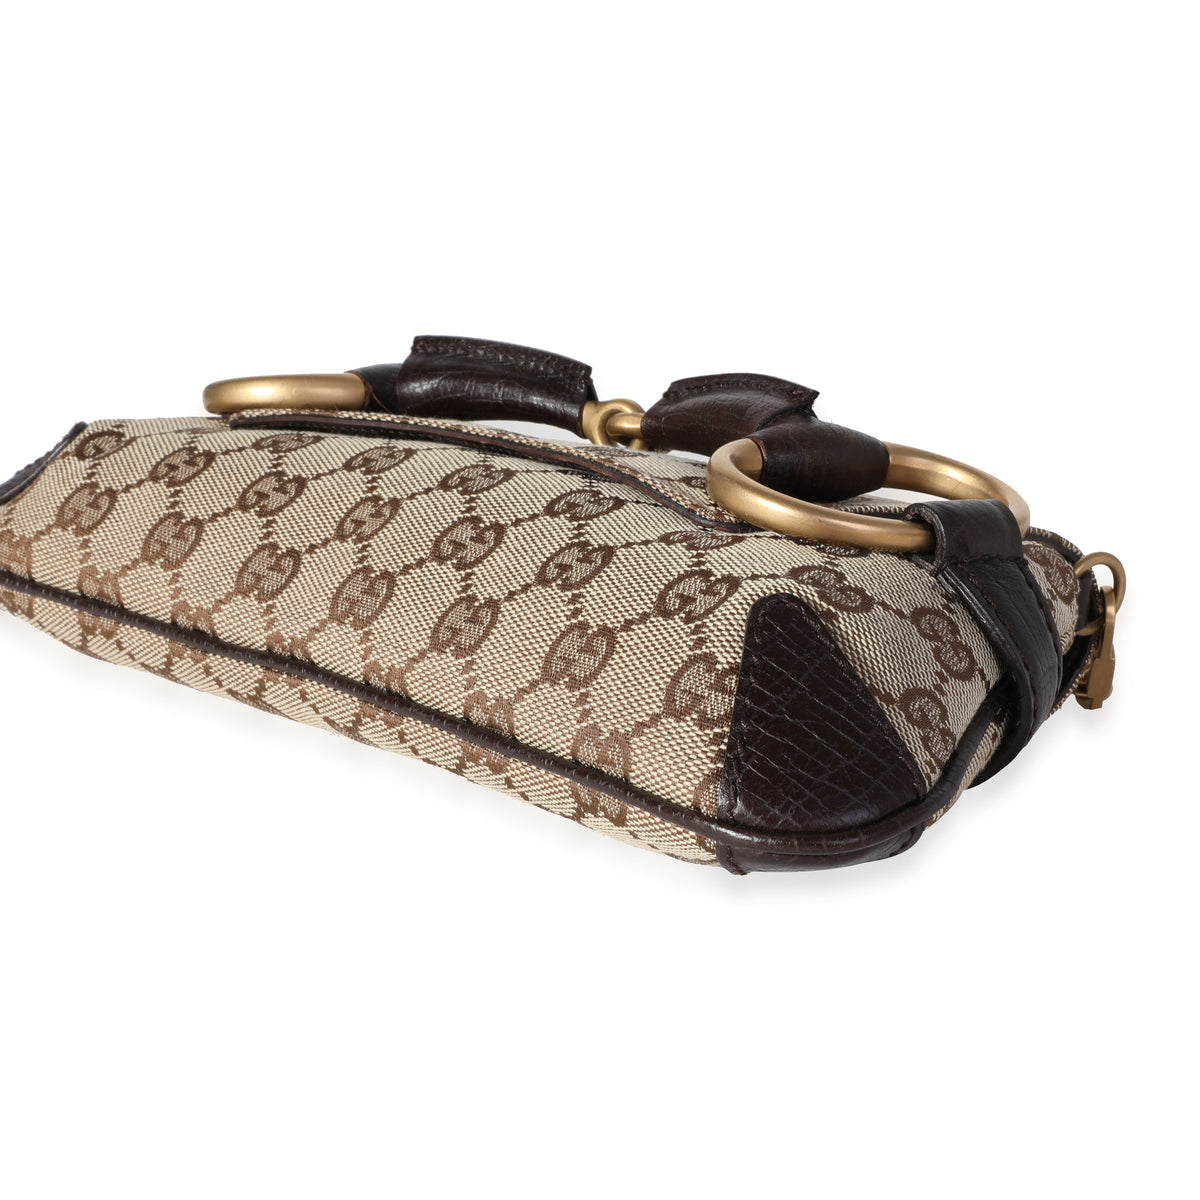 Gucci Brown GG Canvas and Leather Horsebit Clutch